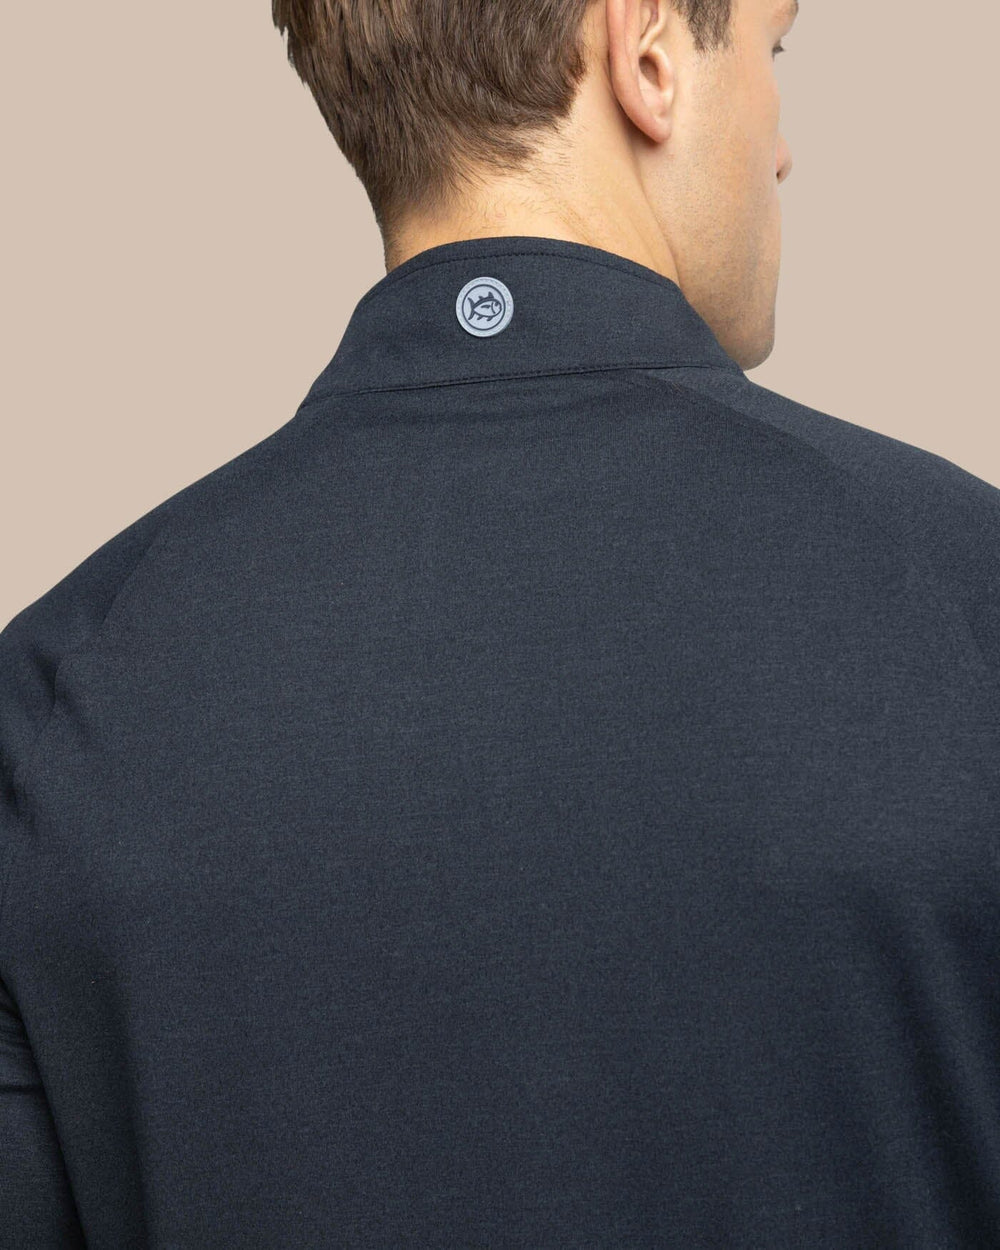 The yoke view of the Southern Tide Cruiser Heather Quarter Zip Pullover by Southern Tide - Heather Caviar Black